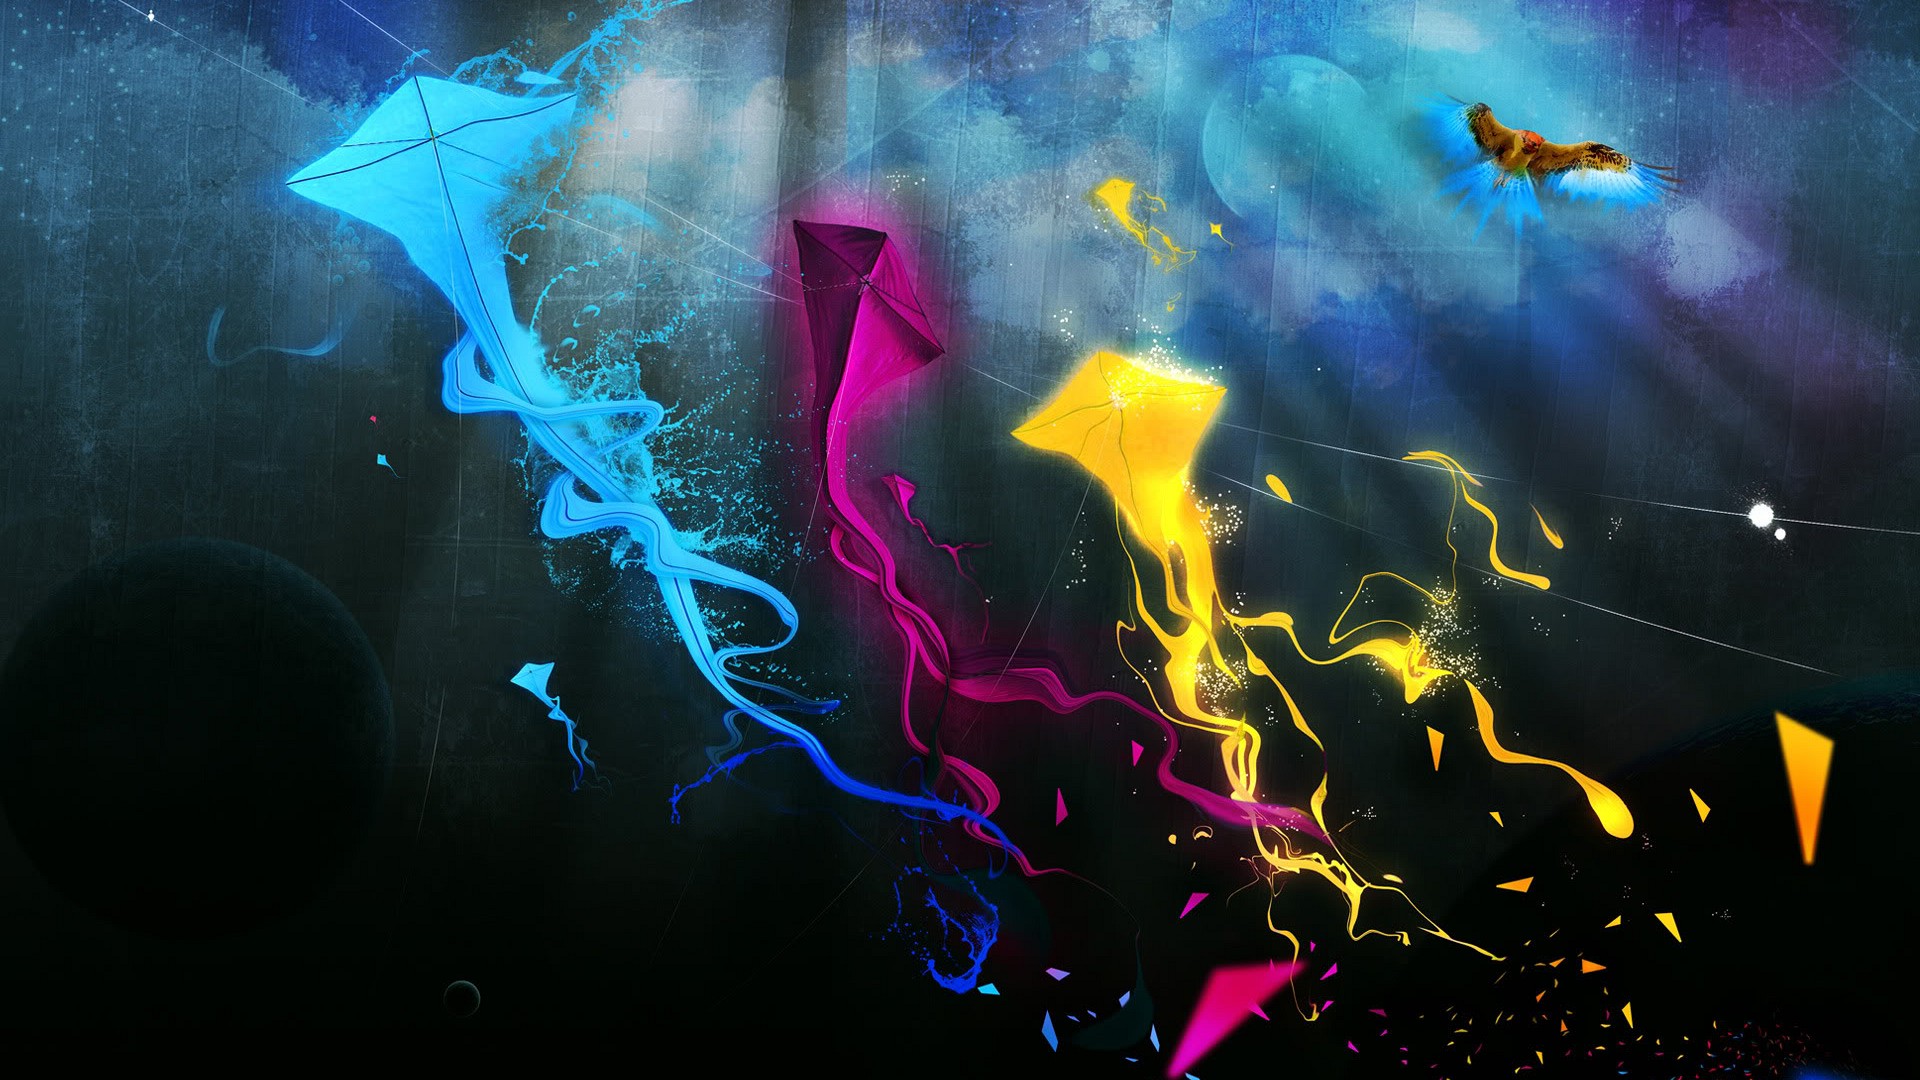 Hd Abstract 720p Hd 3d Wallpaper 1080p 7801 Hd Wallpapers Background